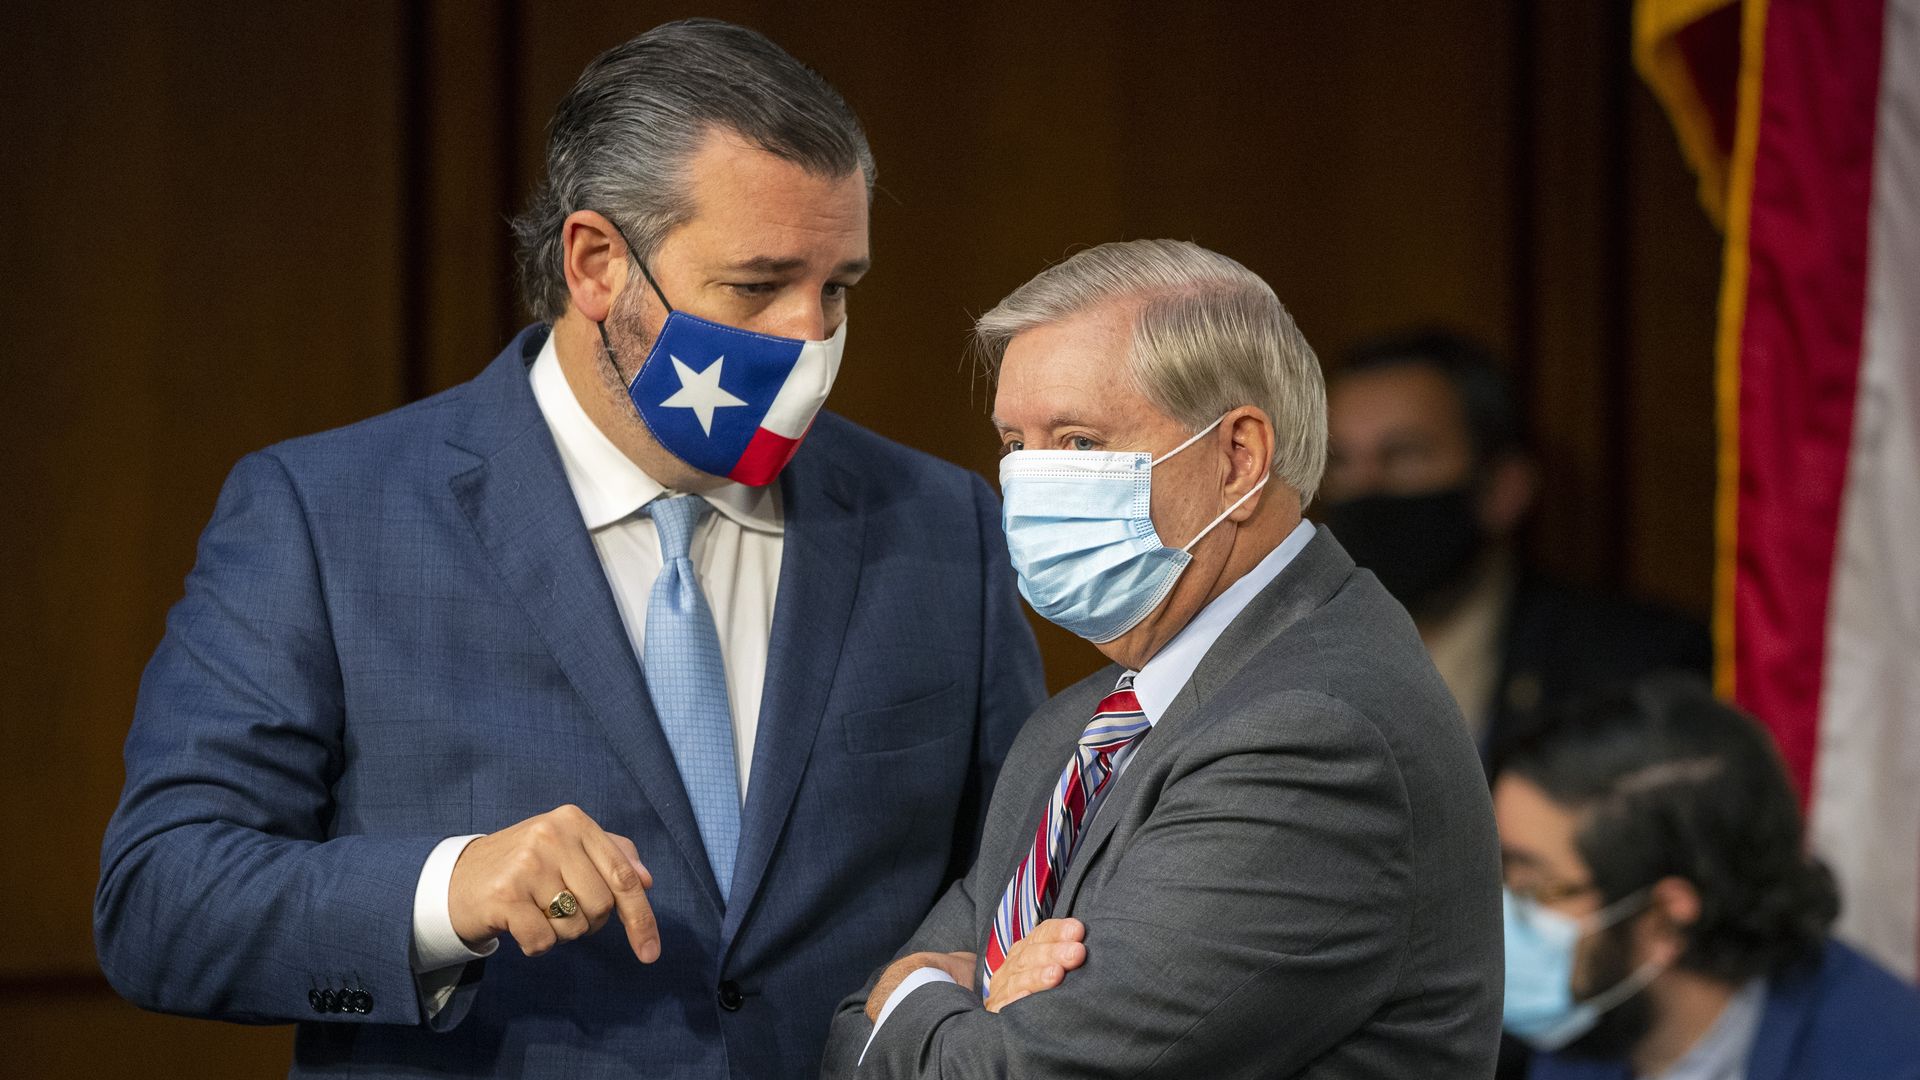 Cruz and Graham stand while wearing face masks